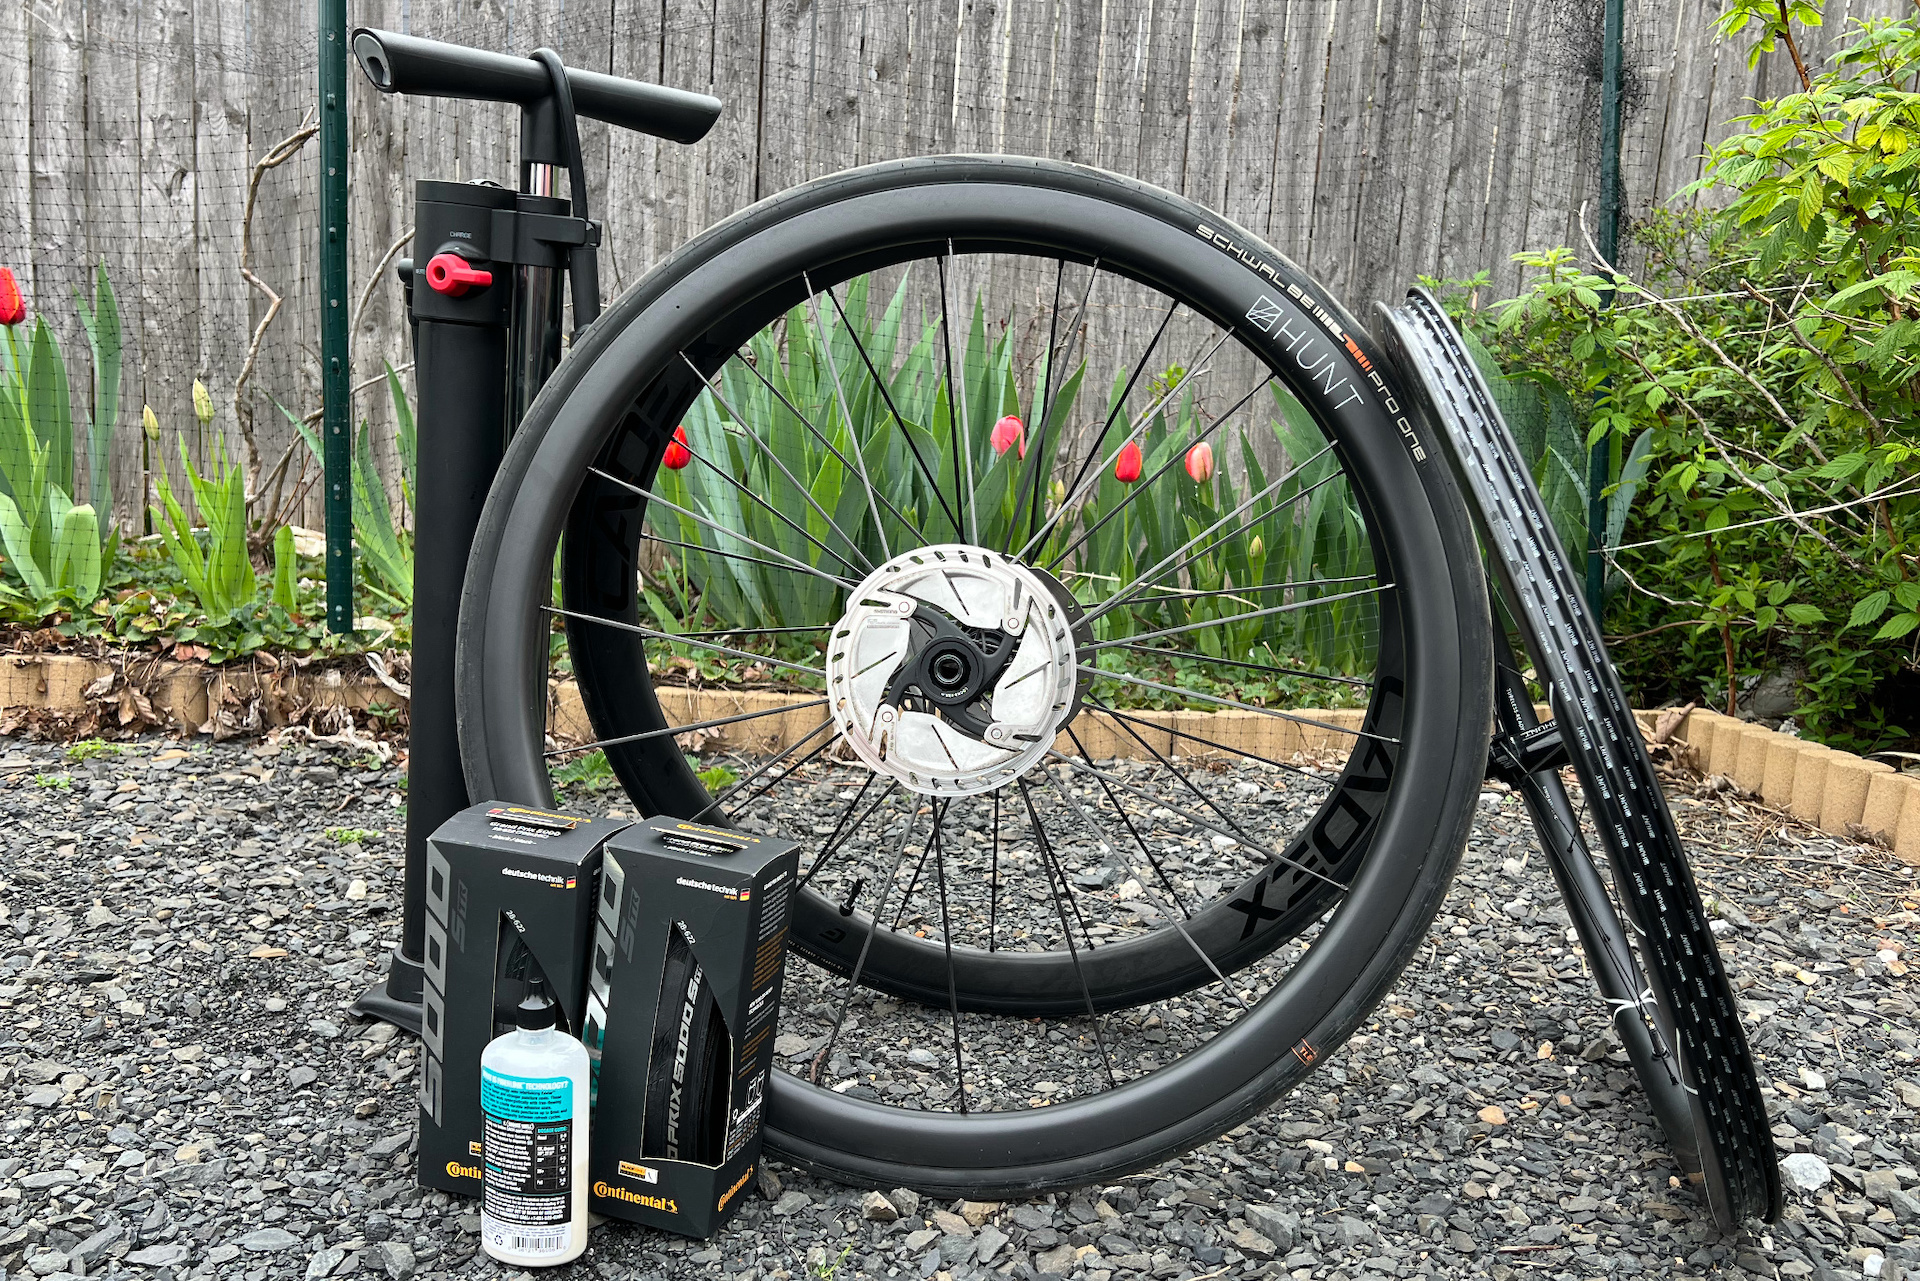 Five things I learned from going tubeless on my road bike